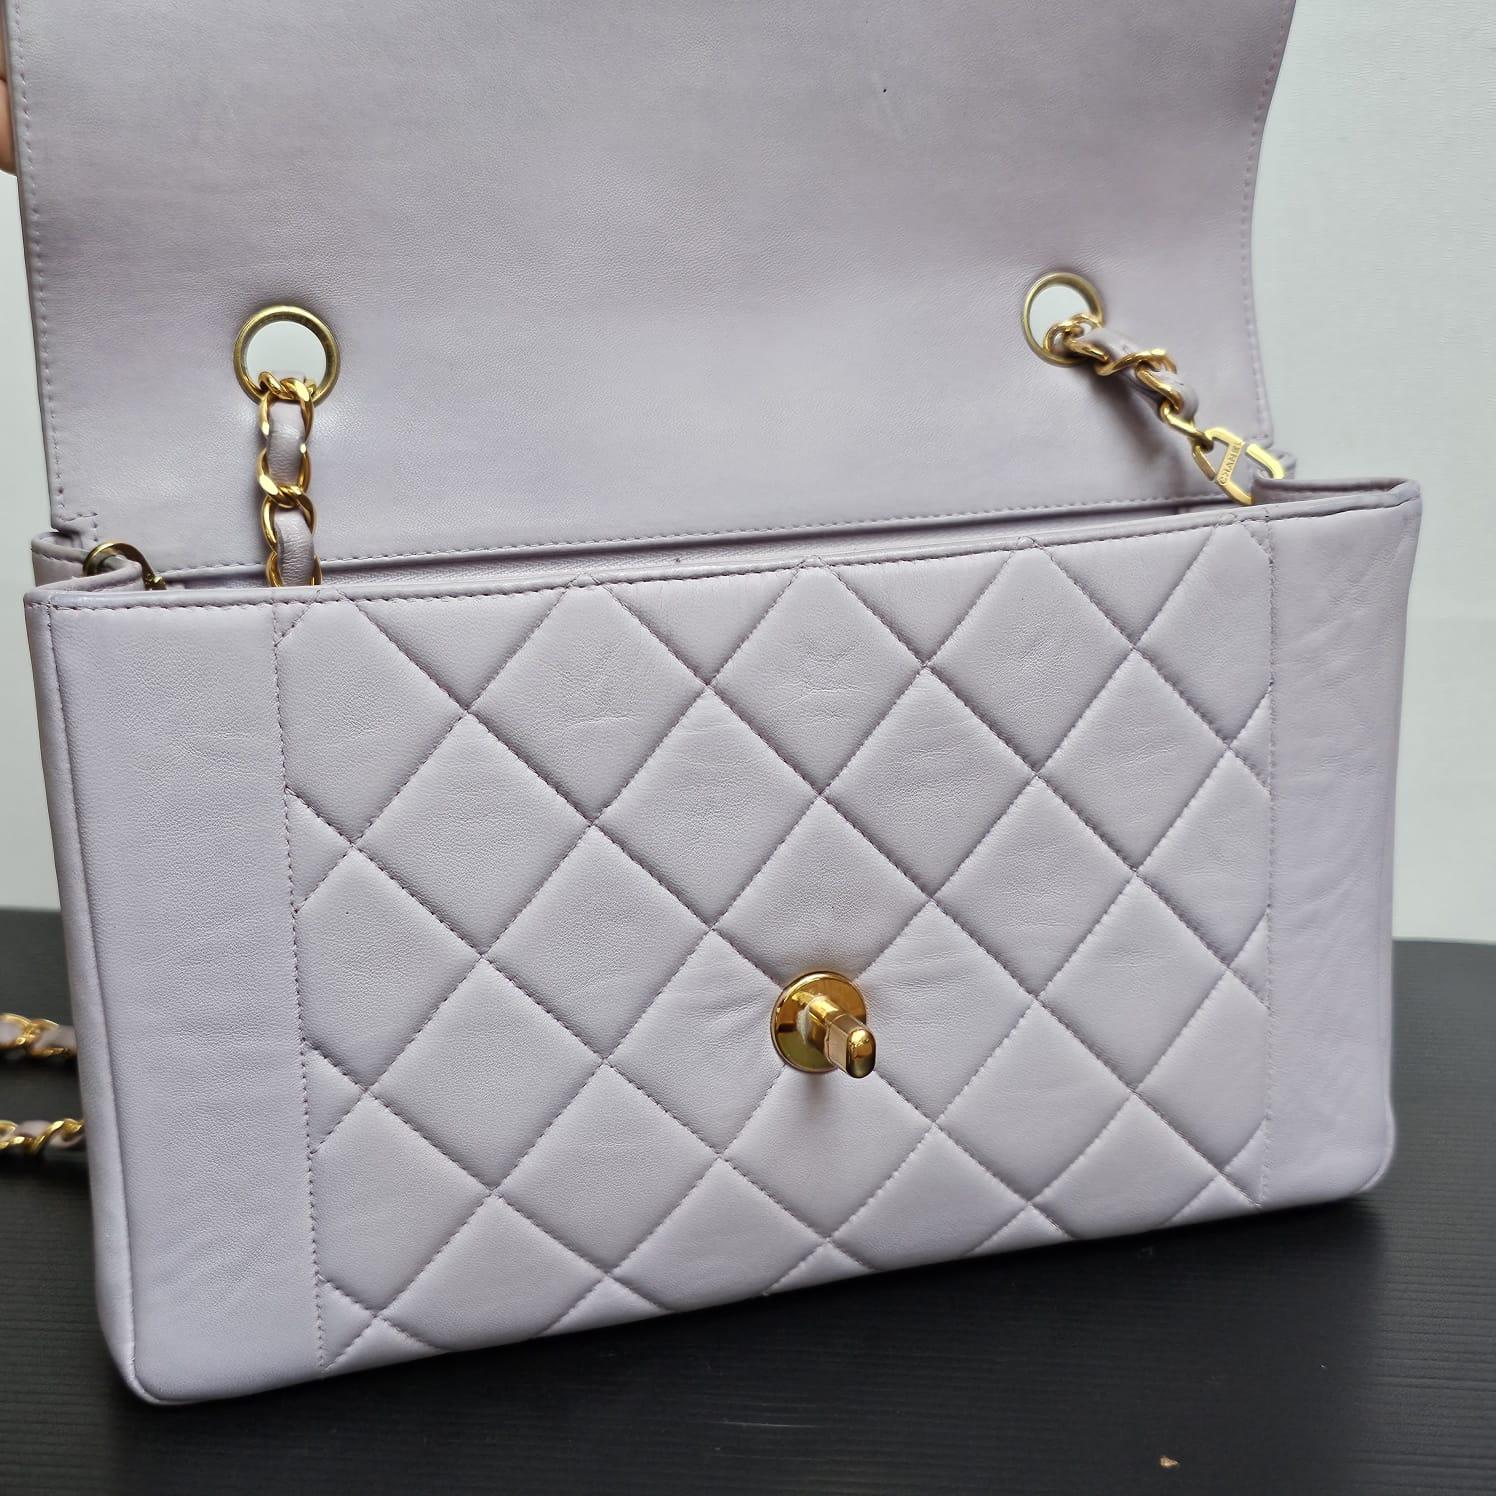 Rare Vintage Chanel Medium Lilac Lambskin Quilted Diana Flap Bag 6